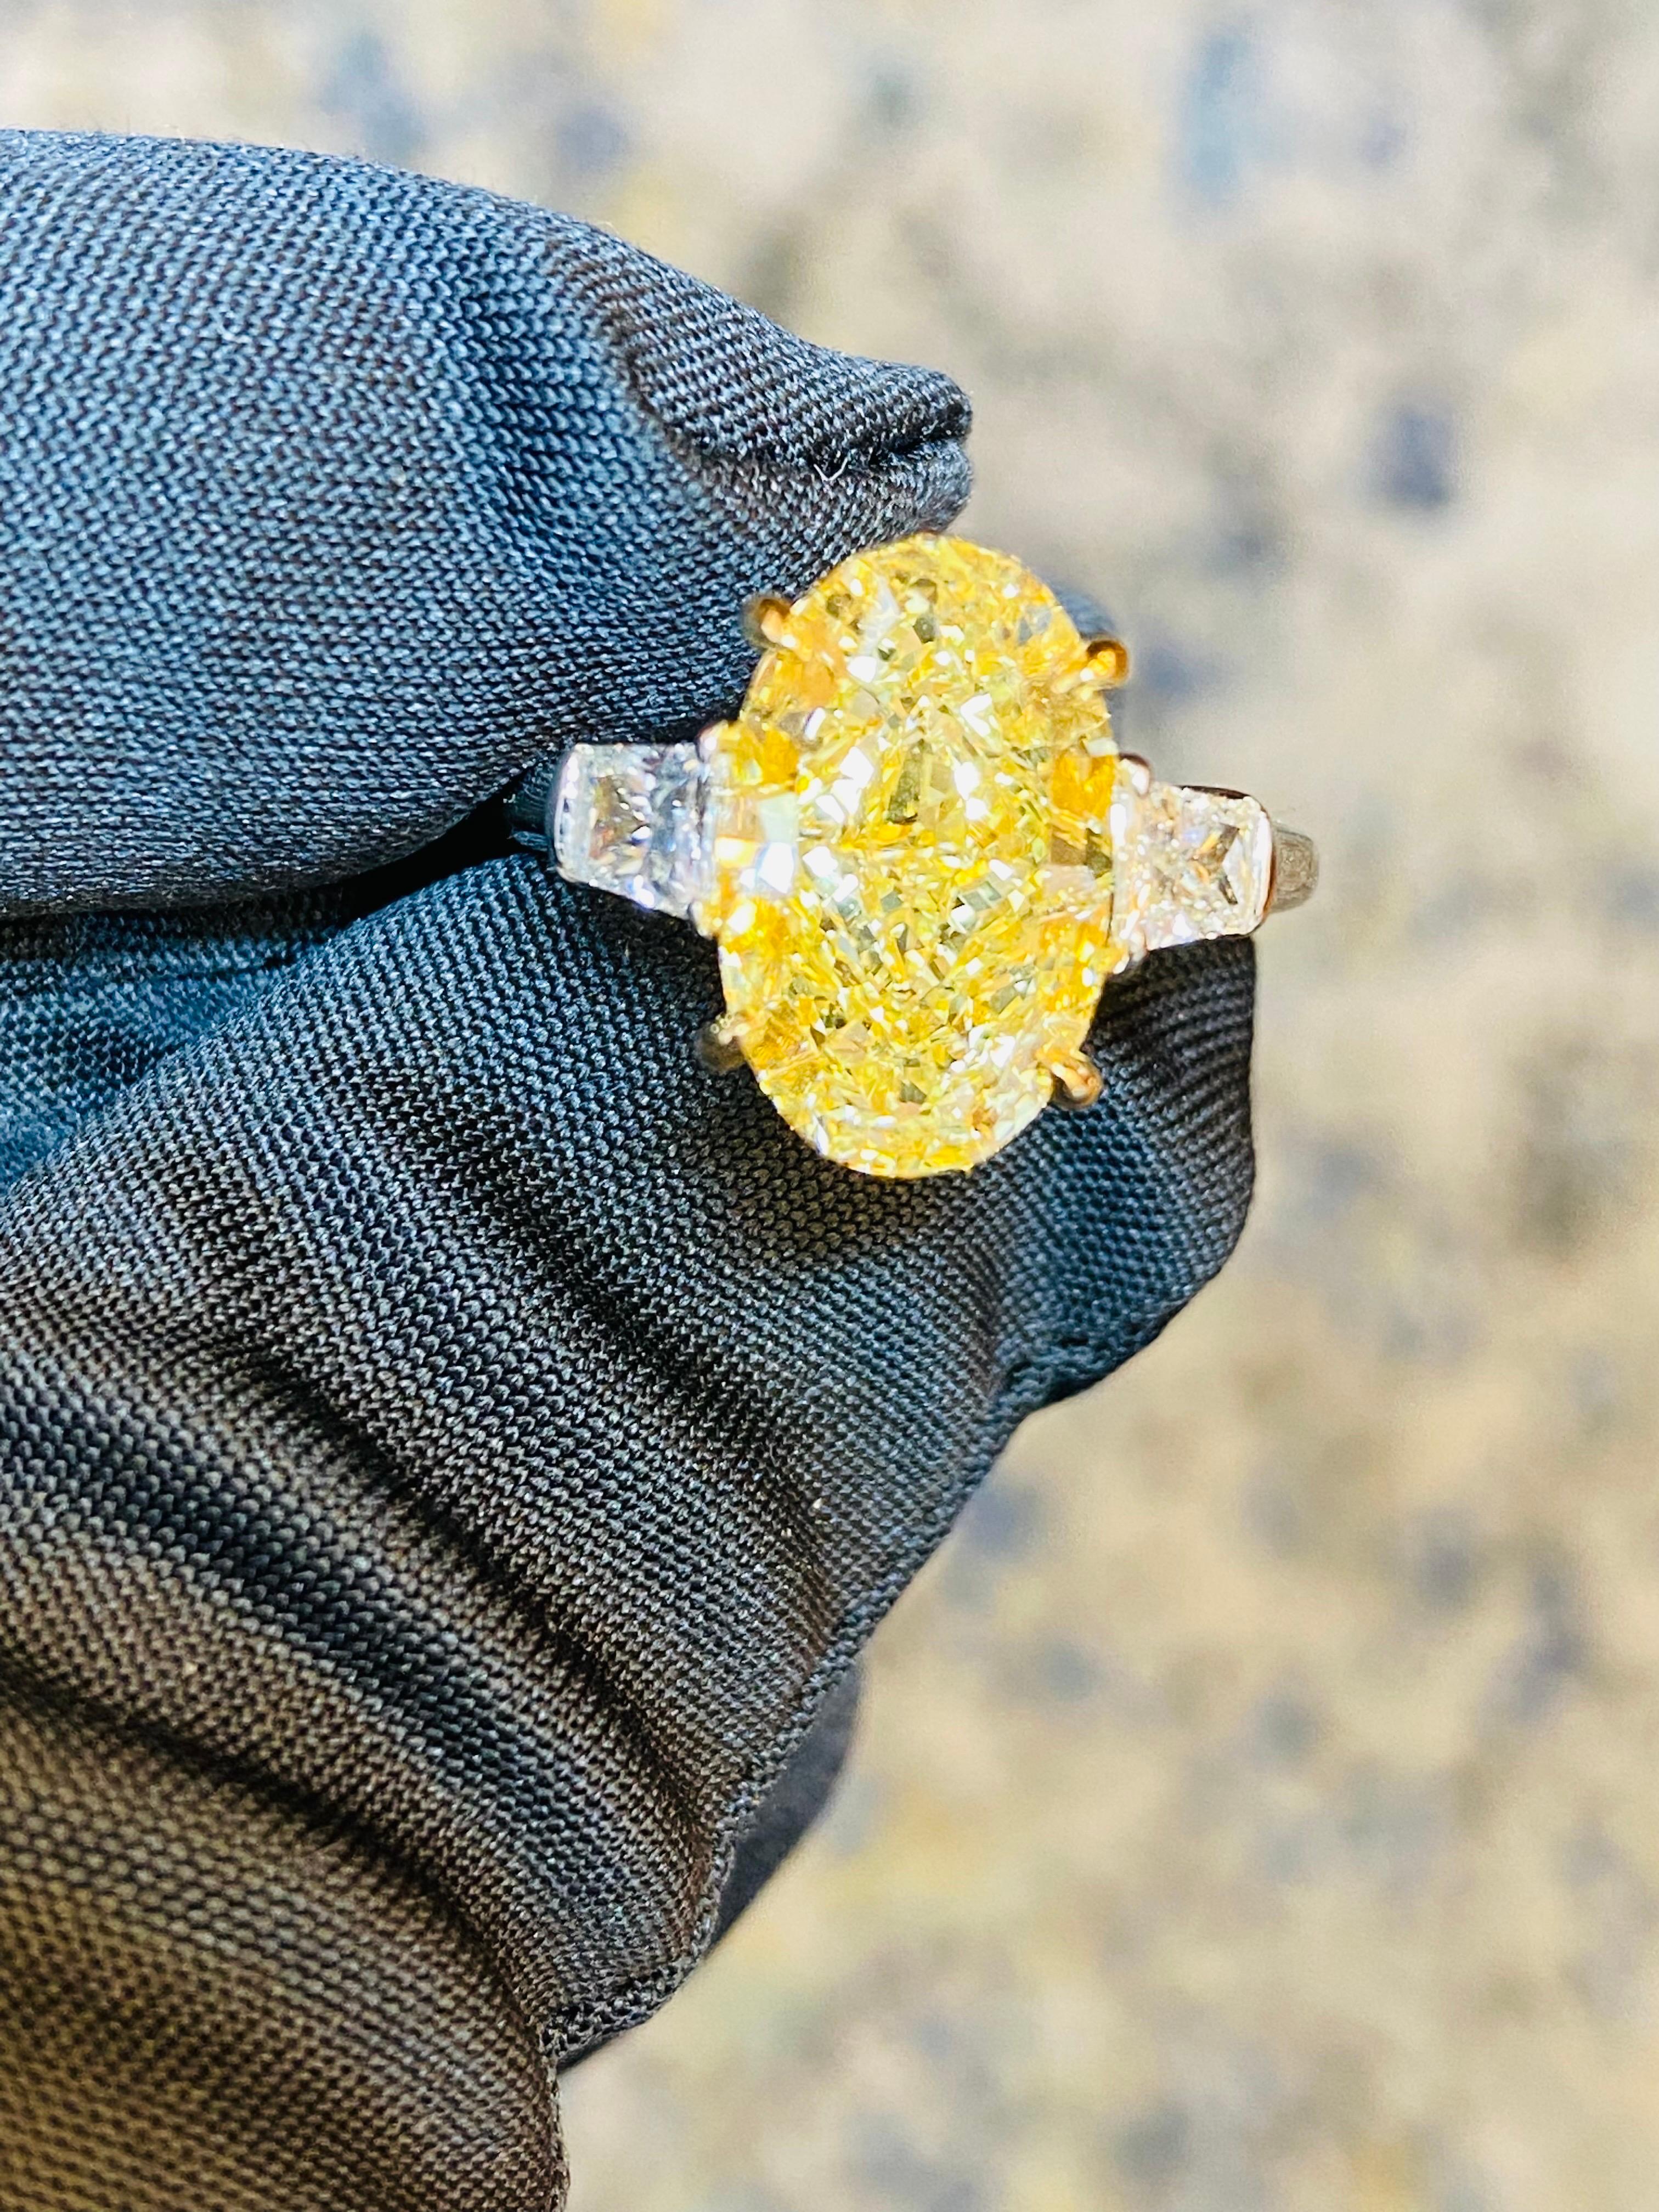 From The Vault at Emilio Jewelry Located on New York's iconic Fifth Avenue,
Showcasing a very special and rare Gia certified natural oval fancy yellow diamond. Gorgeous elongated shape and color! Please inquire for details. 
 Hand made in the Emilio